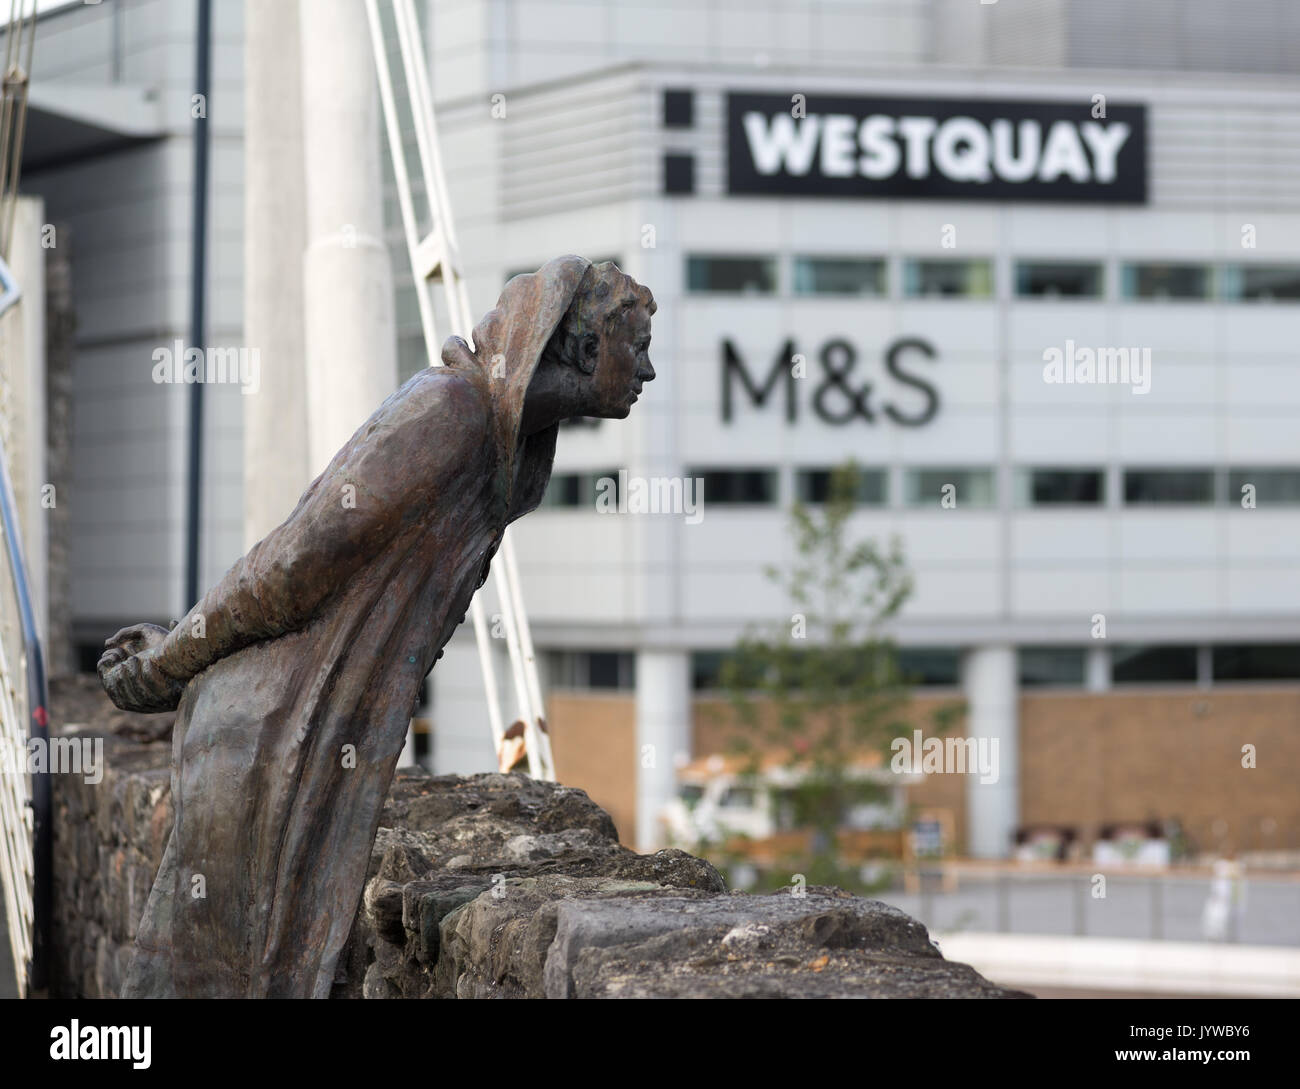 Sculpture of former mayor John Le Fleming on Southampton bridge with Westquay shopping centre Marks and Spencer store and logo in the background. Stock Photo